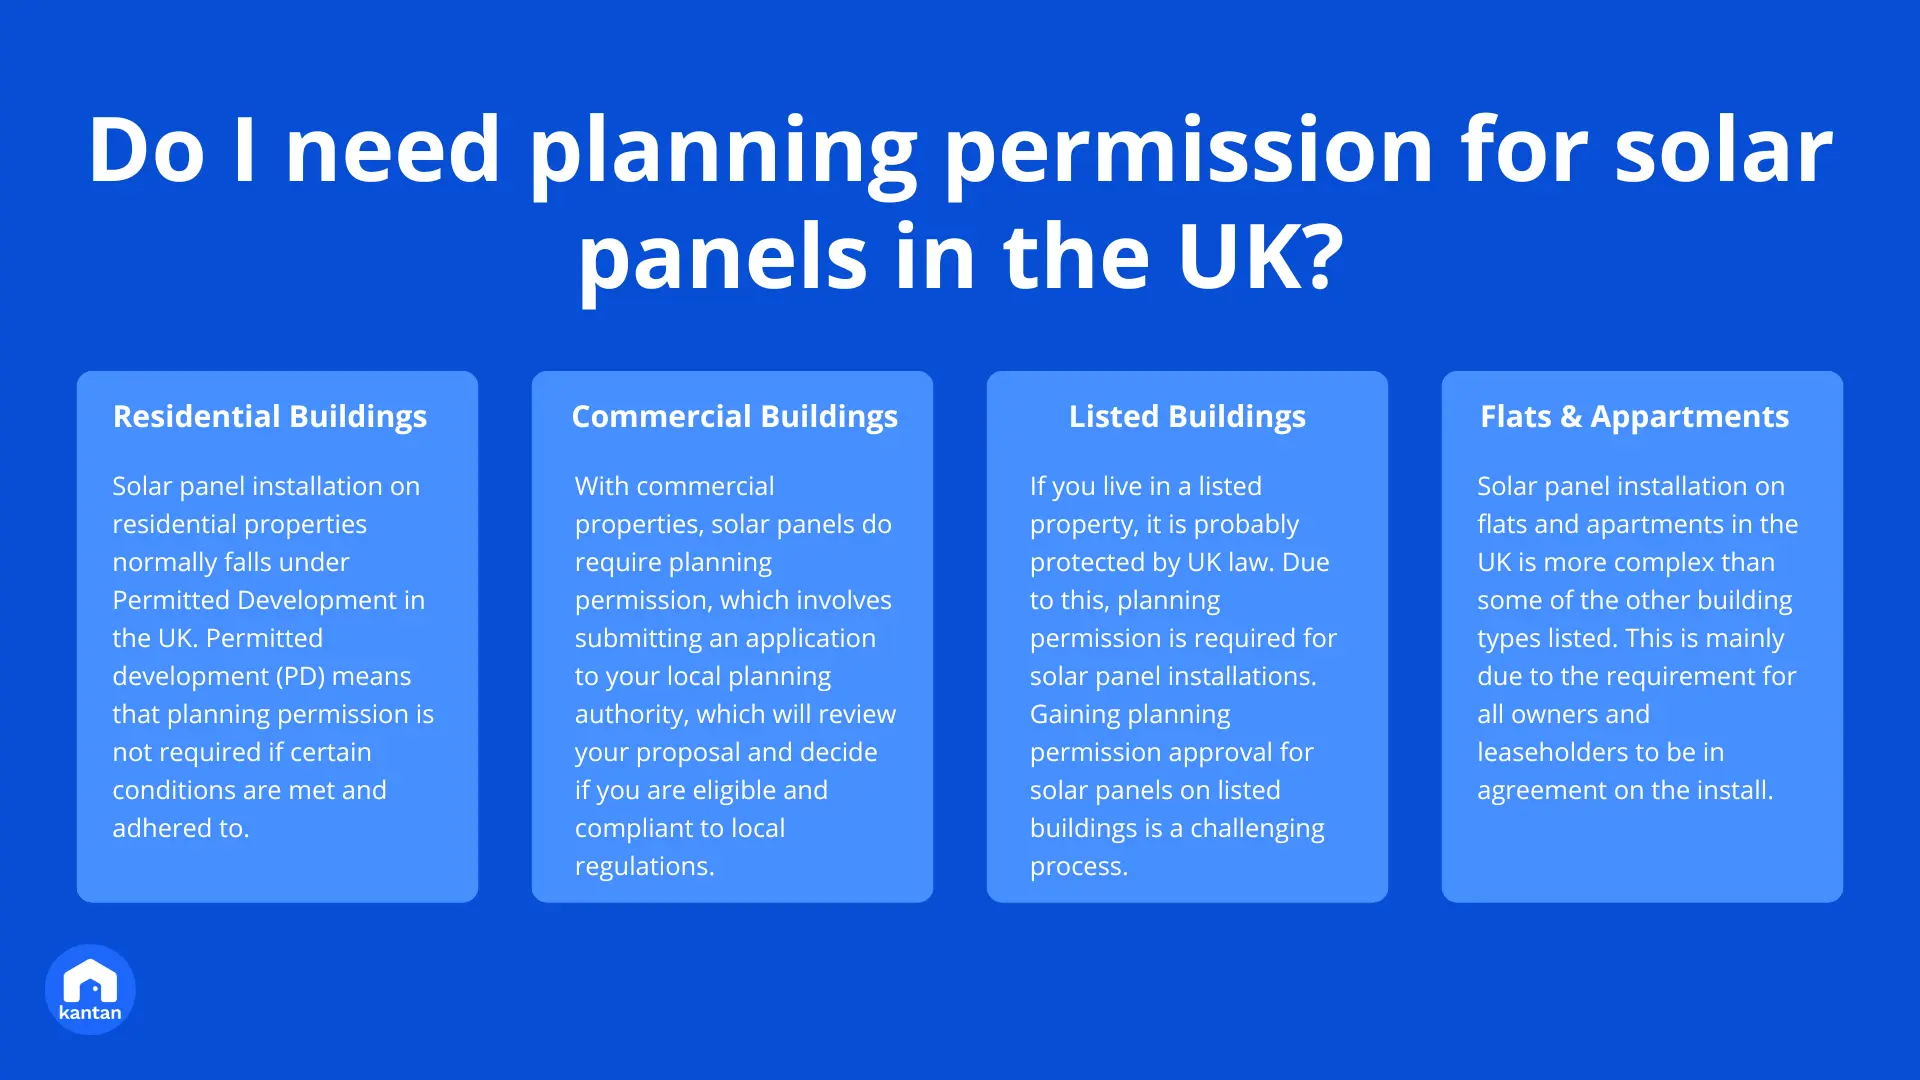 do you need planning permission for solar panels - Do solar panels need planning permission UK